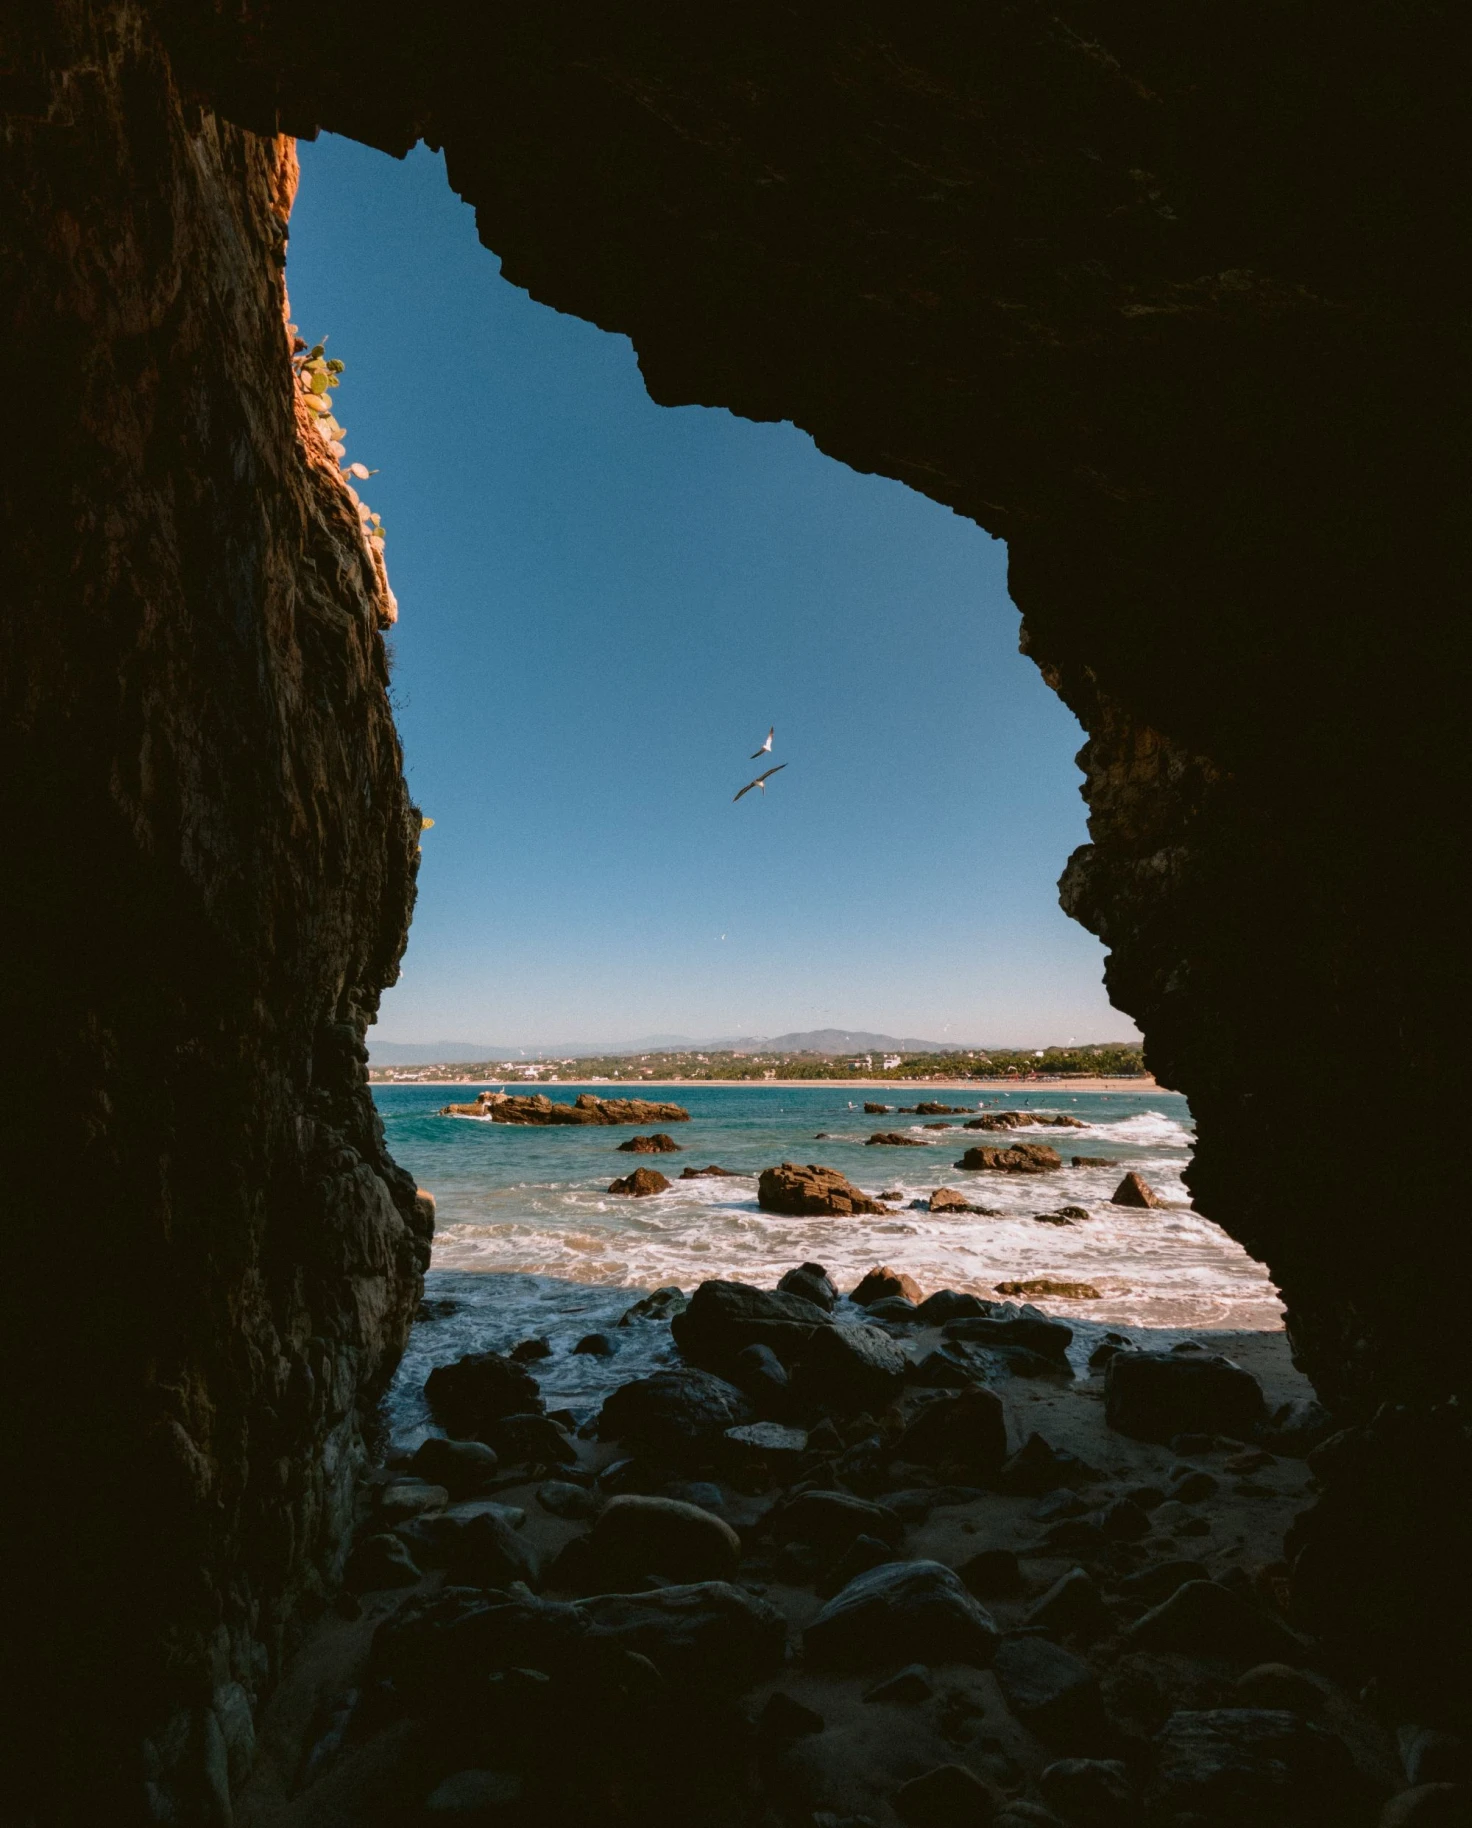 view through a rock formation of a rocky beach on a blue day with a hang glider 